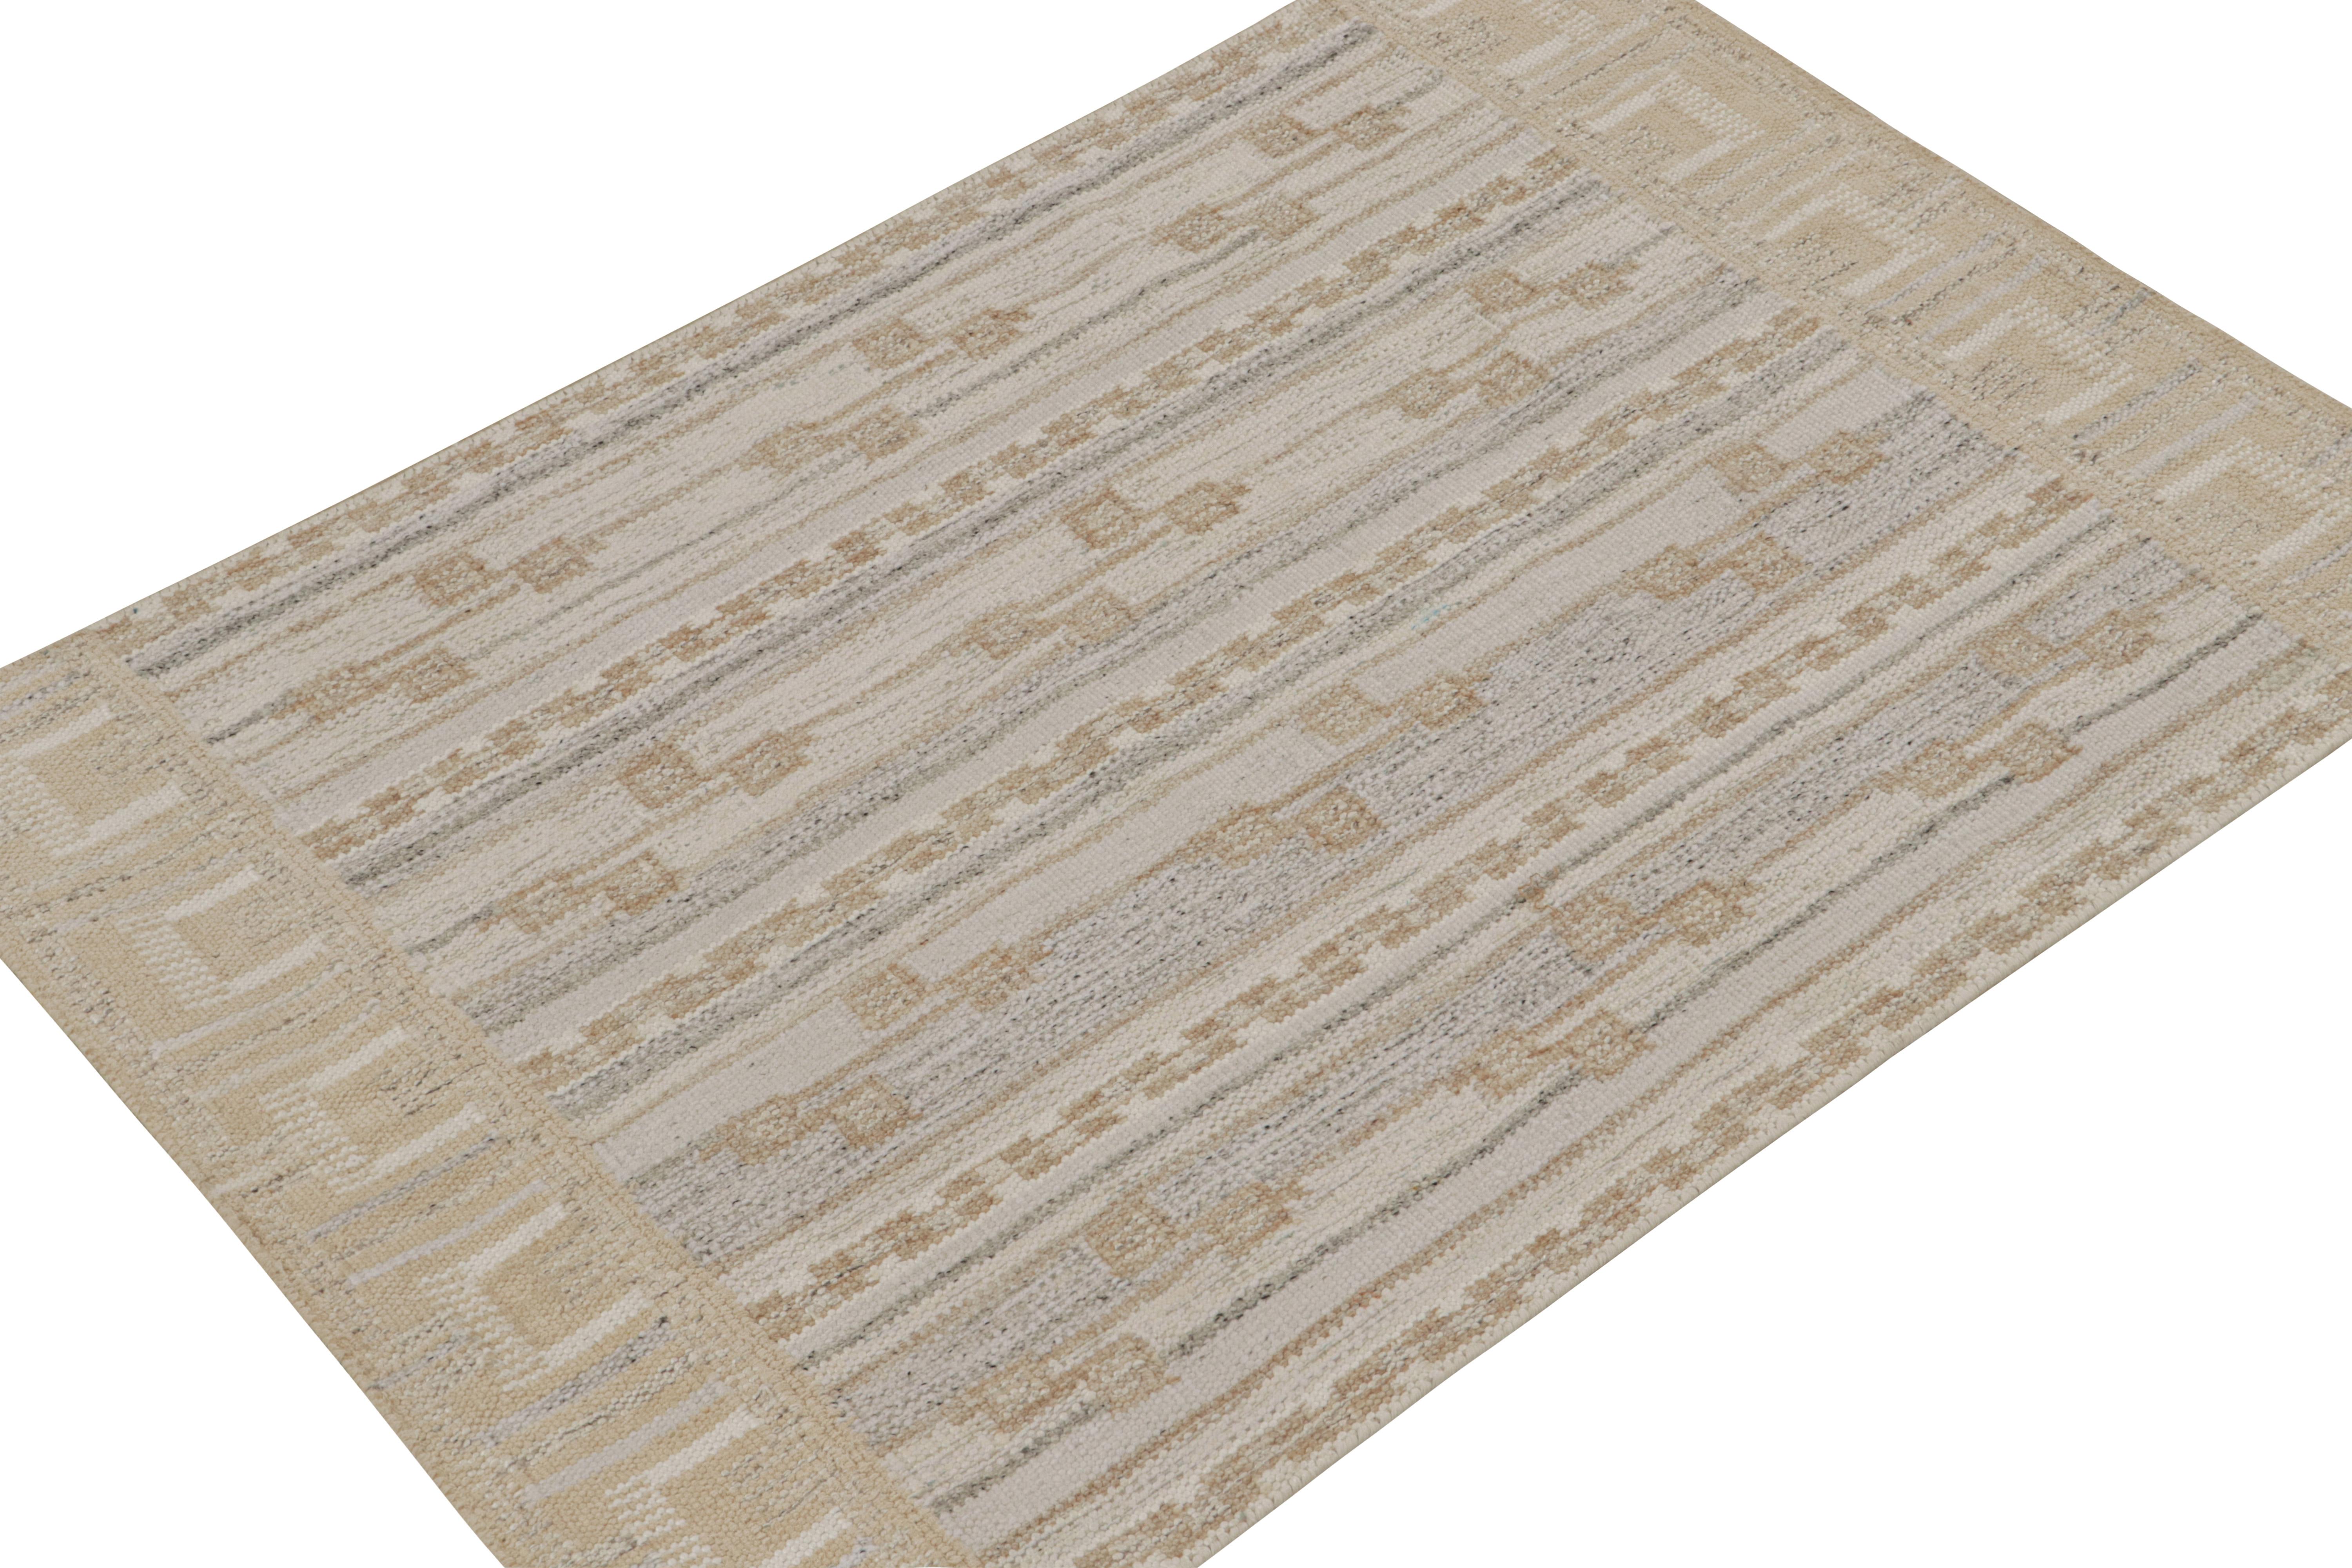 A smart 4x6 Swedish style kilim from our award-winning Scandinavian flat weave collection. Handwoven in wool & undyed natural yarn.

On the Design: 

This rug enjoys geometric patterns in comfortable greige & off white. Keen eyes will admire undyed,